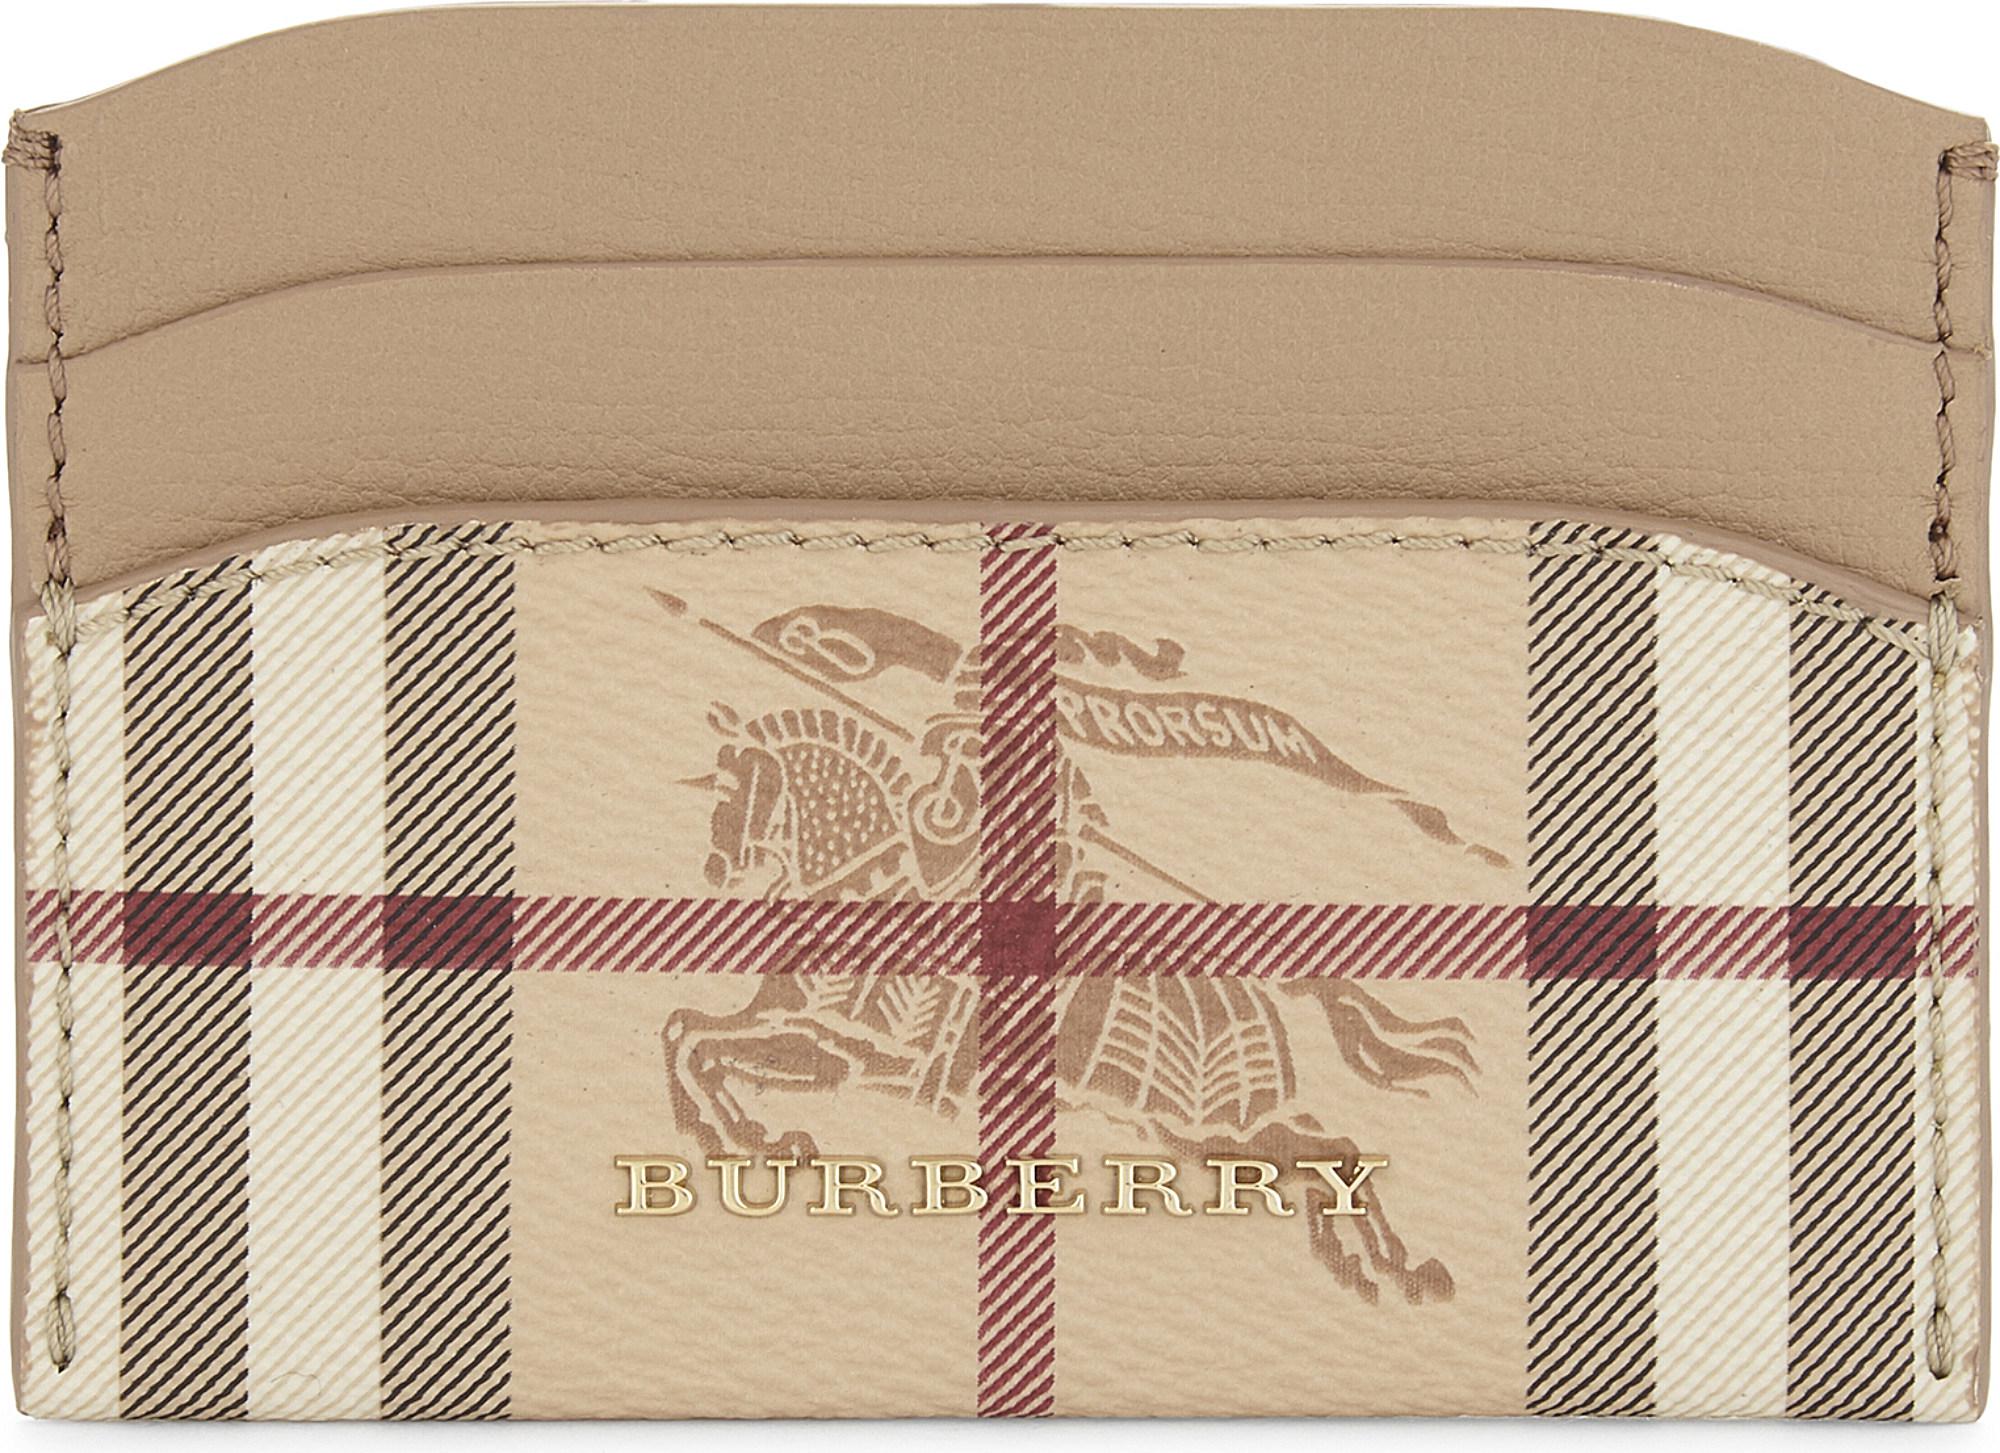 BURBERRY Leather card holder. #burberry #